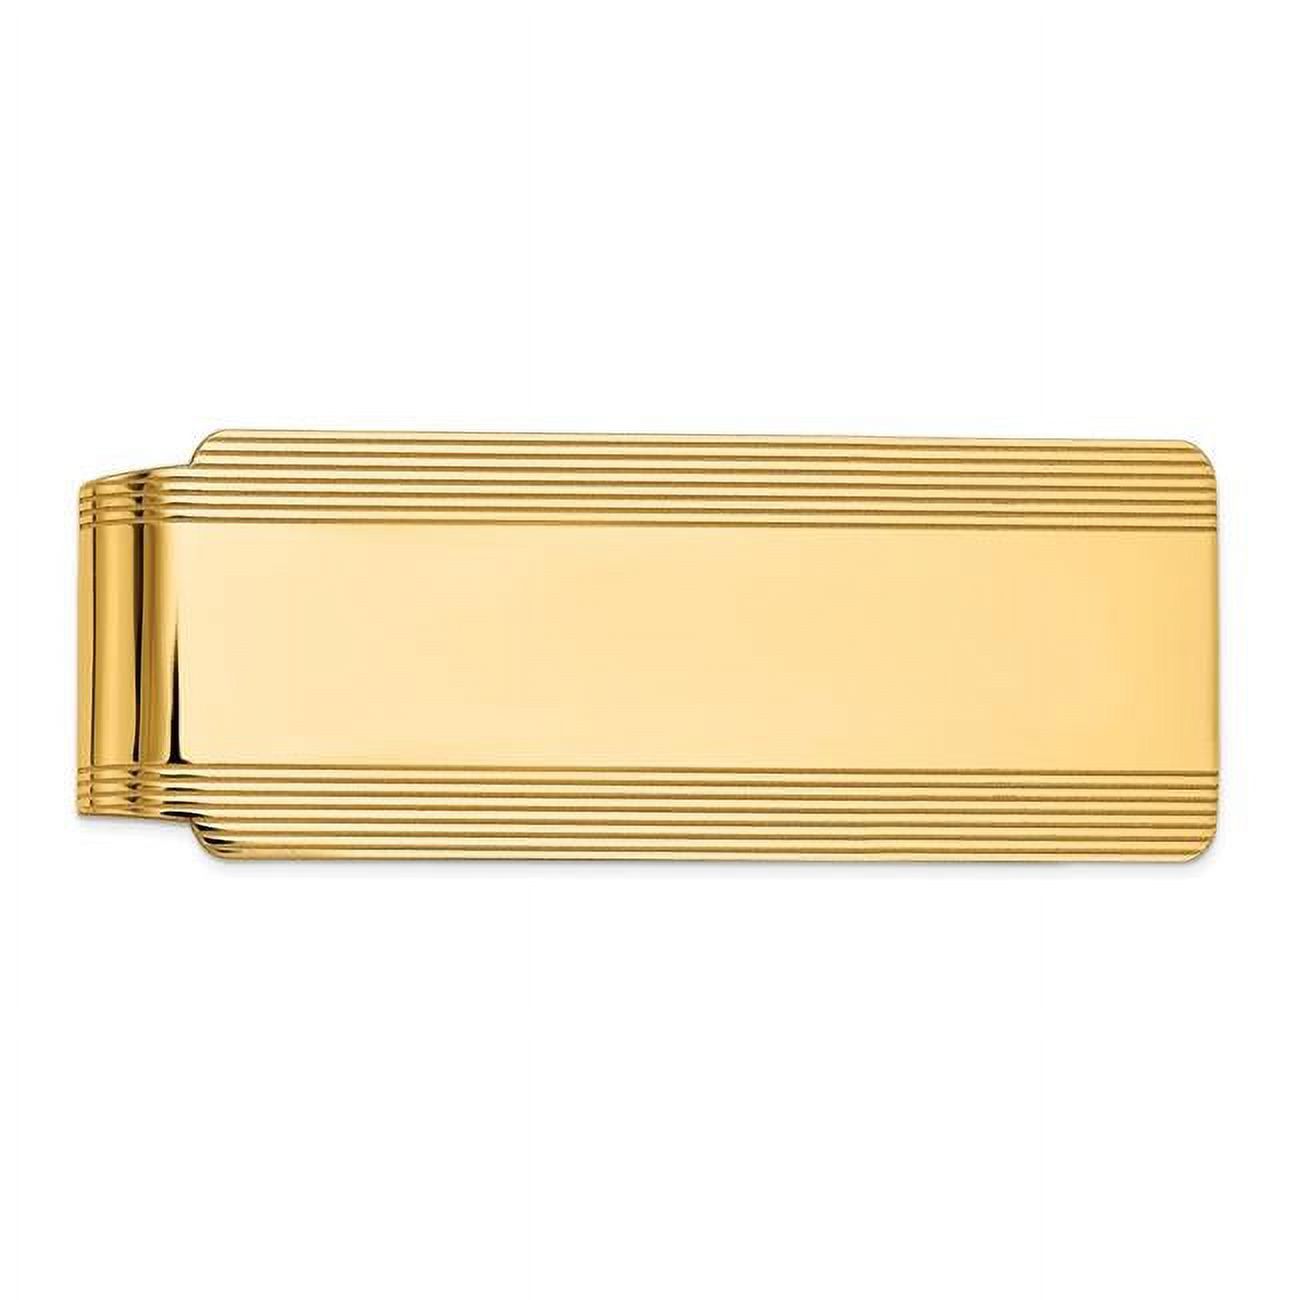 Primal Gold 14 Karat Yellow Gold Men's Grooved Polsihed Money Clip - image 1 of 5